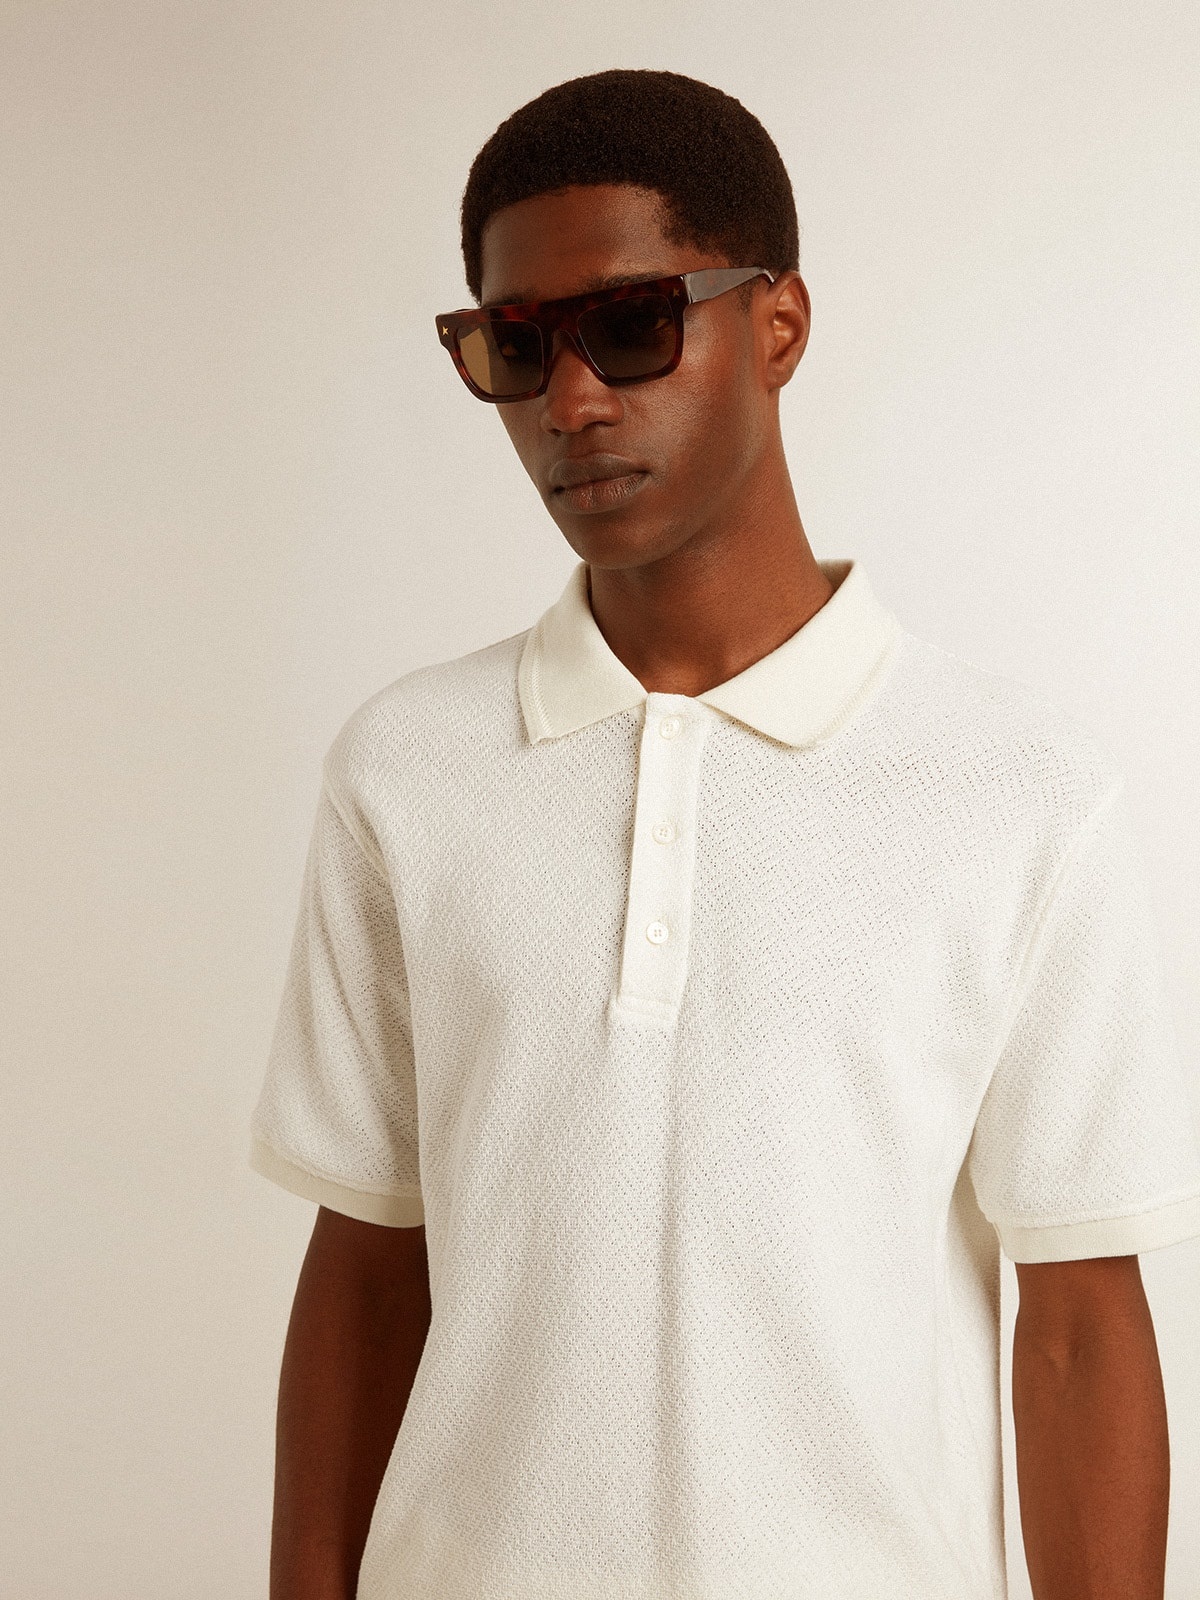 Men's polo shirt in white cotton with mother-of-pearl buttons - 5